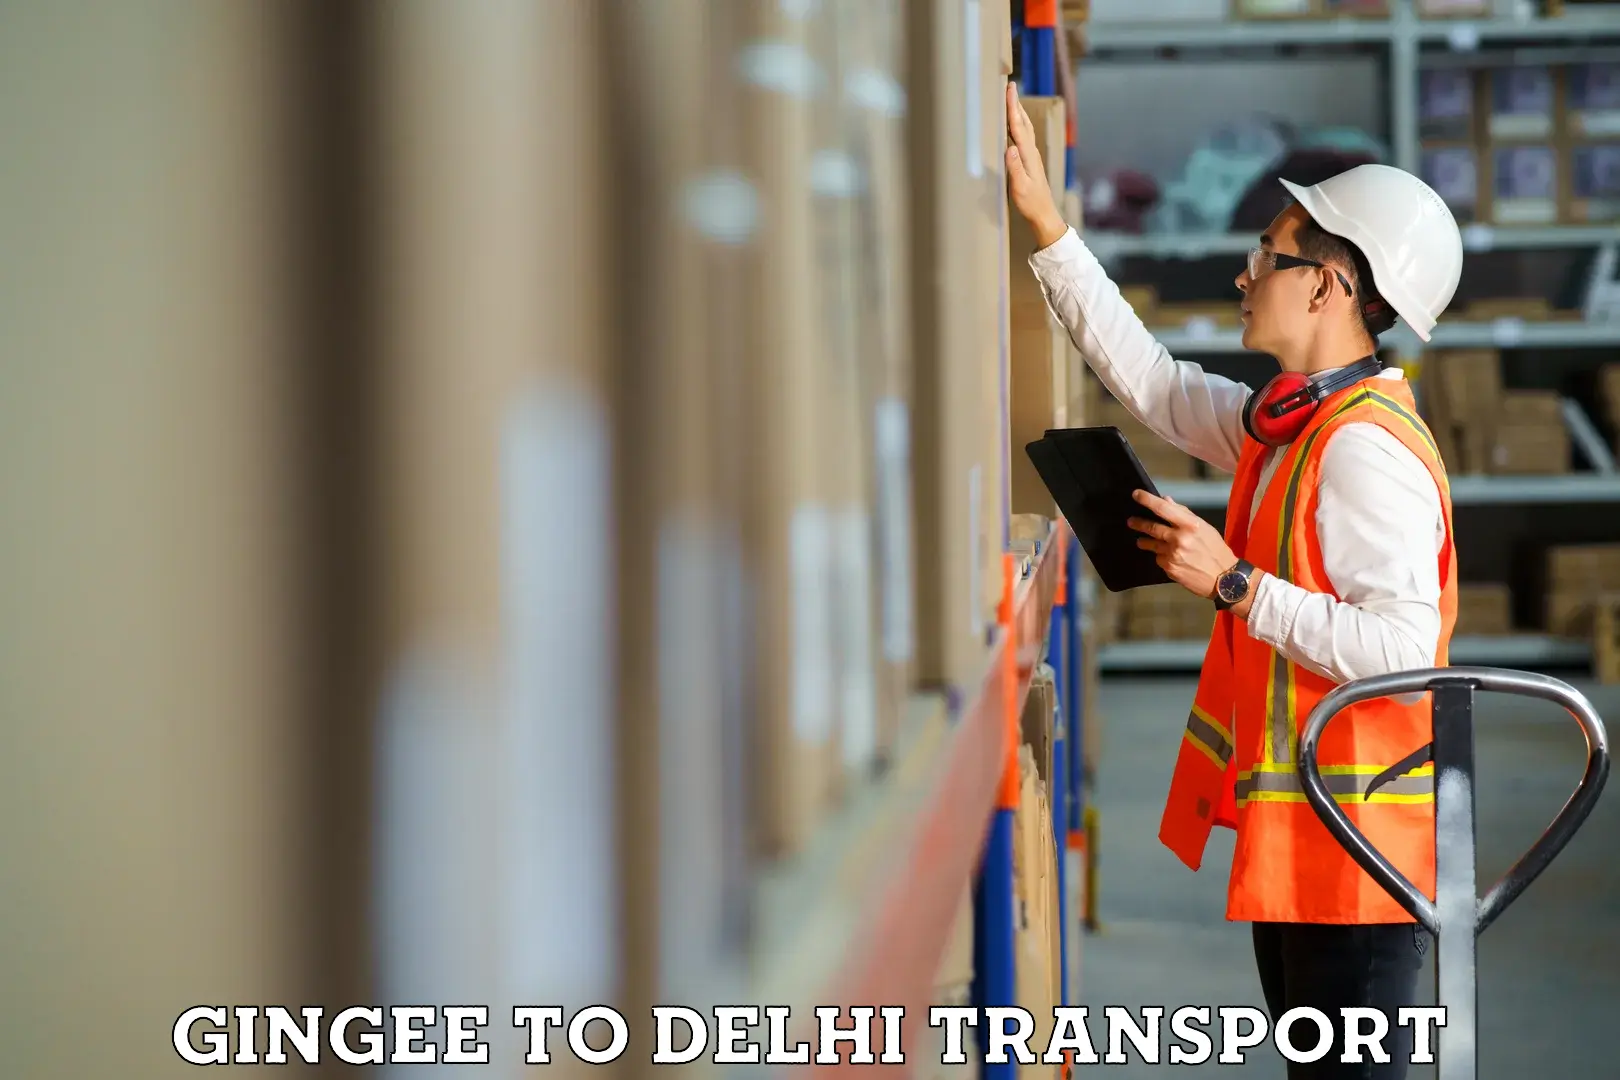 Cargo train transport services Gingee to Delhi